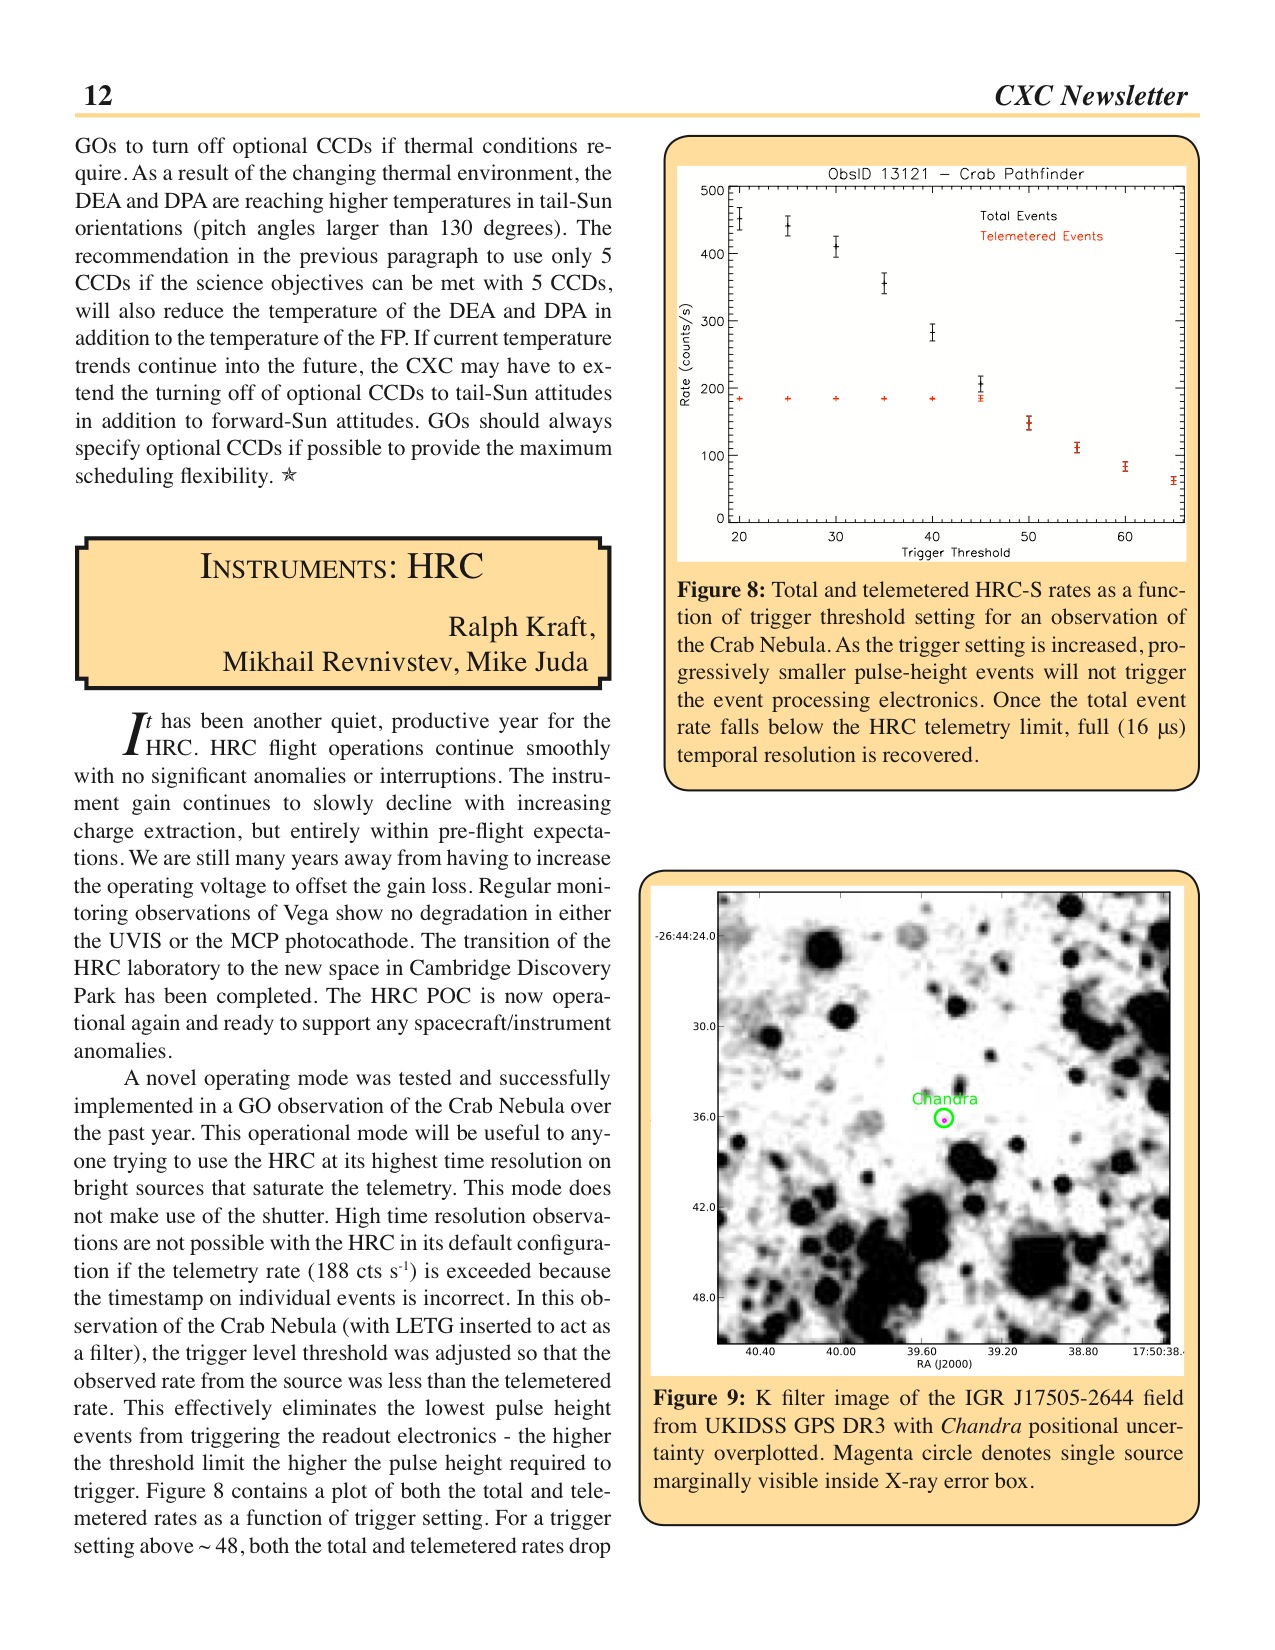 Page 12 of the Chandra Newsletter, issue 18.